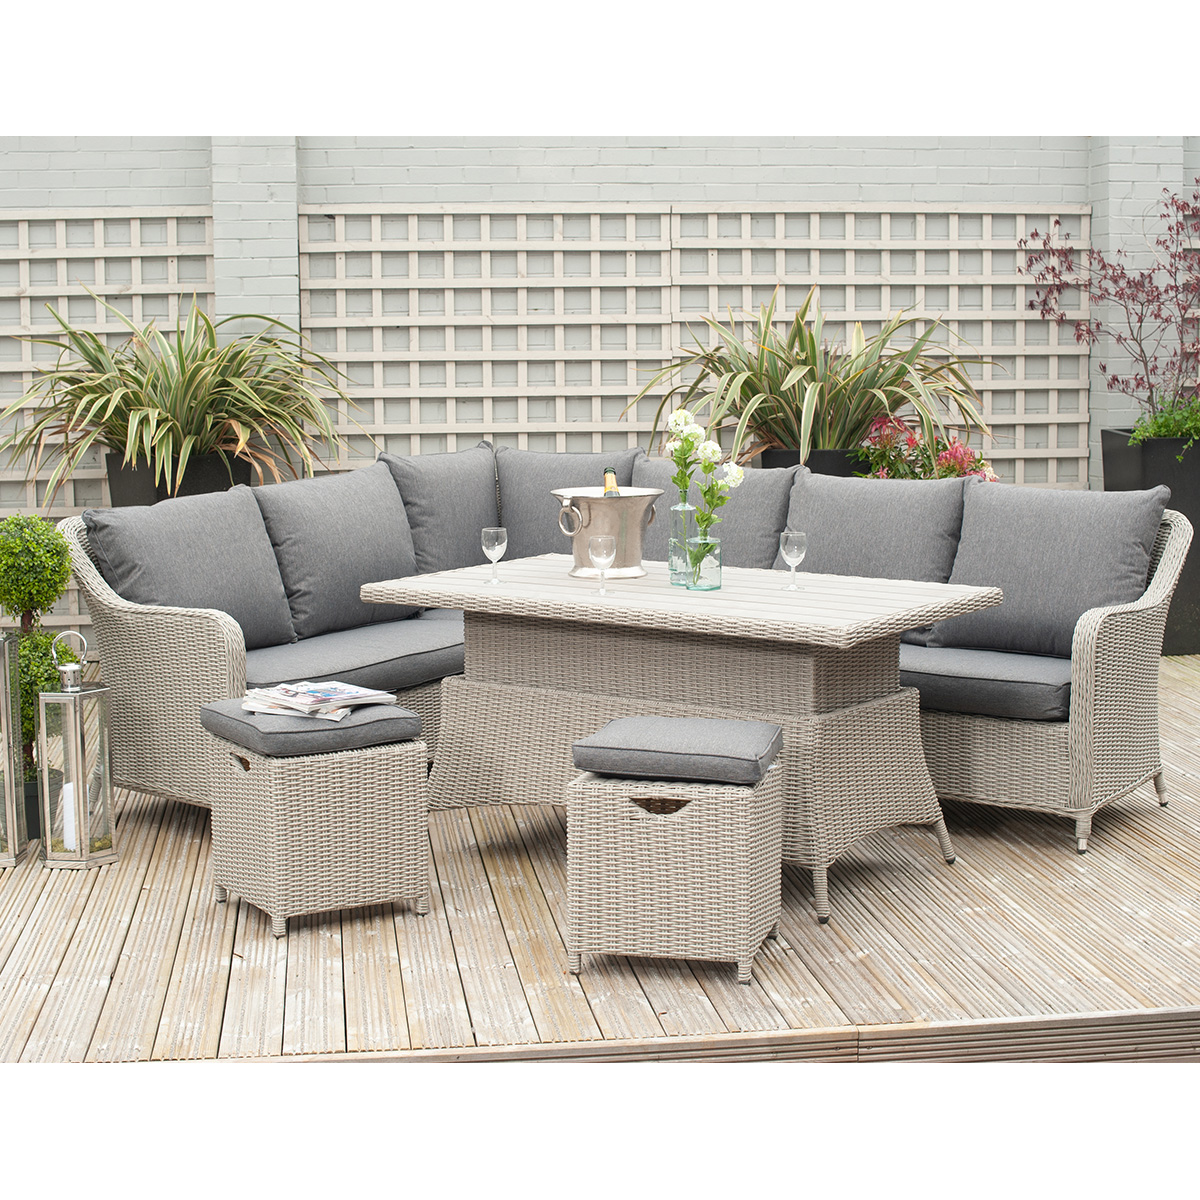 pacific lifestyle antigua corner dining set with adjustable table  stone  grey